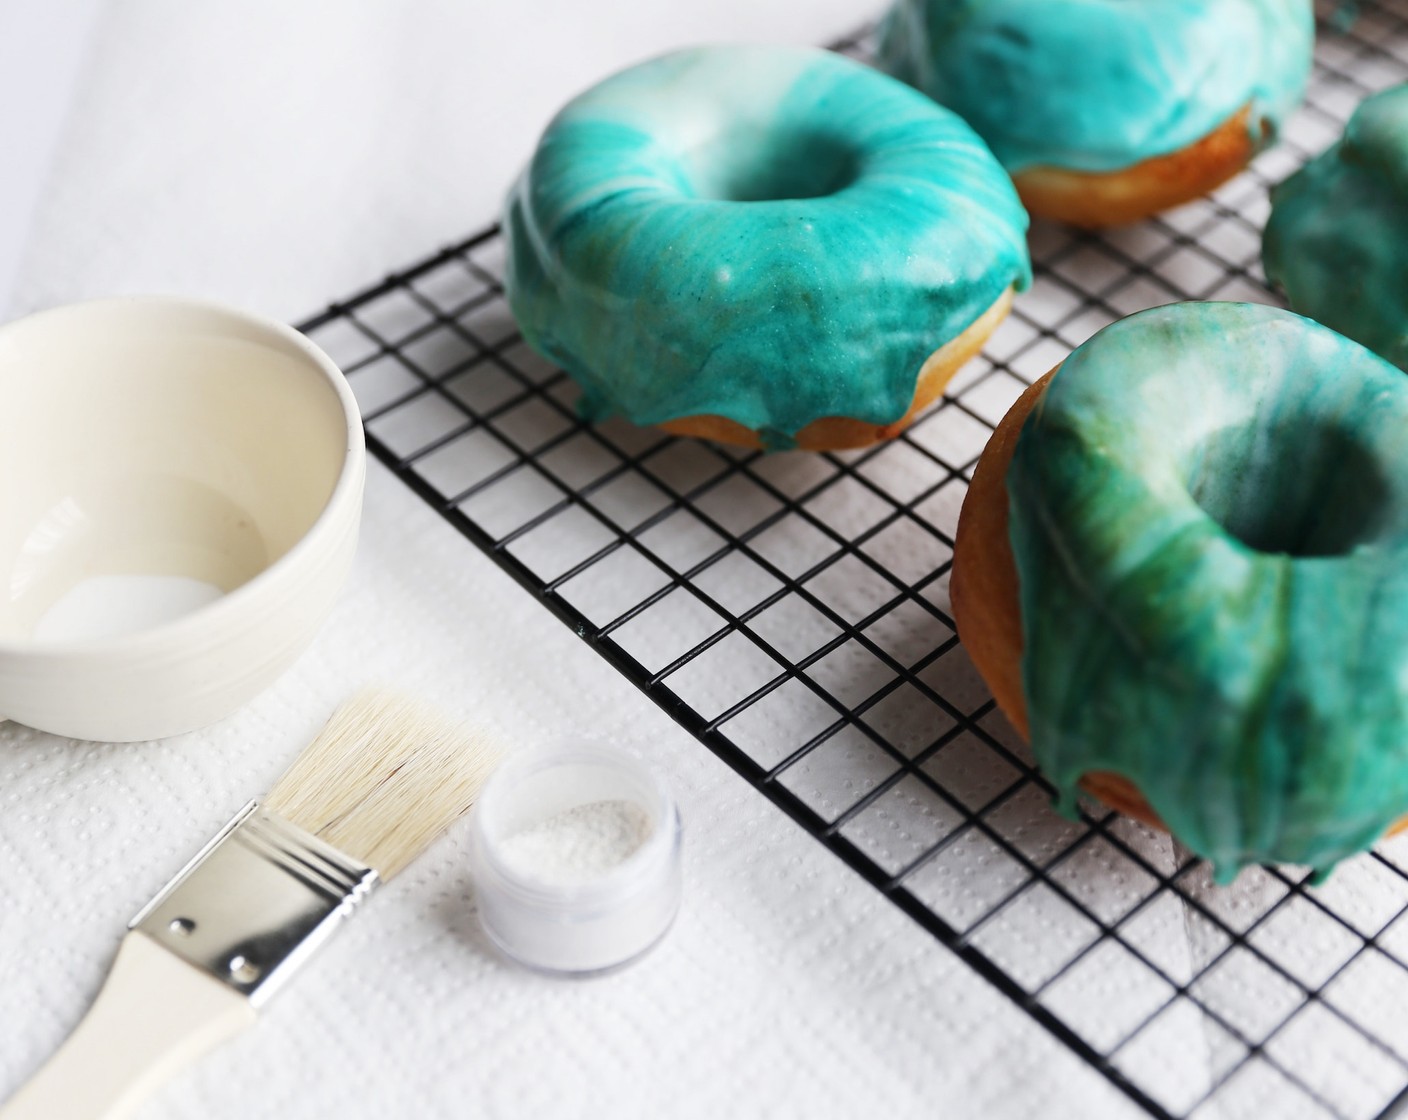 step 22 While the glaze is still wet, add the finishing touches to your Mermaid Doughnuts by using a clean brush to flick additional AmeriColor Soft Gel Paste™ in Bright White (to taste) onto the glaze, and then finishing off with a sprinkle of Edible Glitter (to taste).